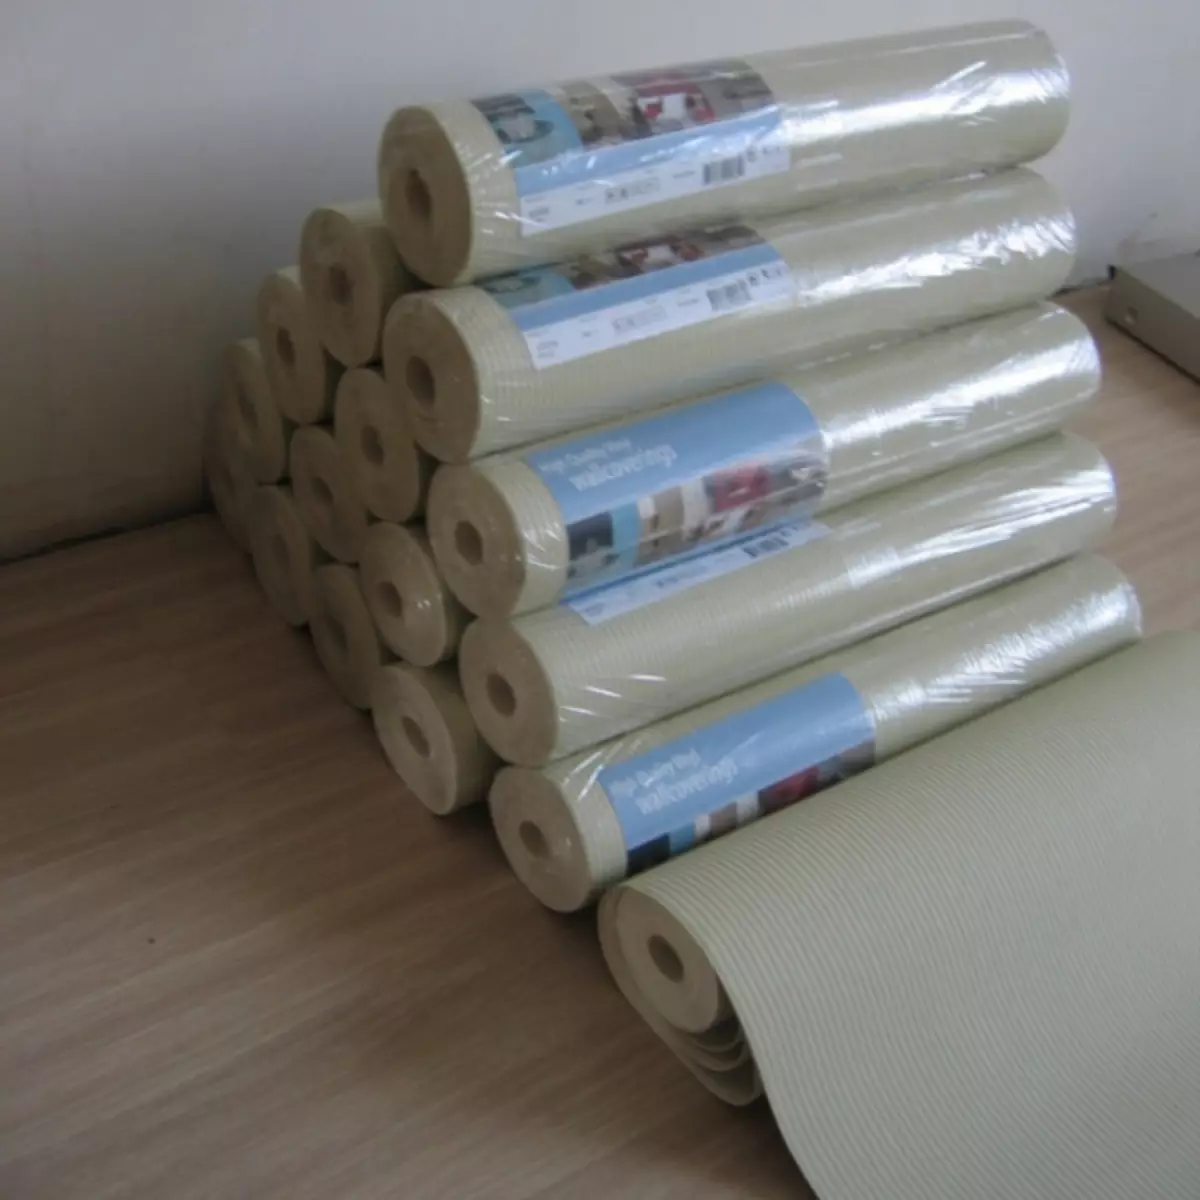 How to Buy Wallpaper In The Store